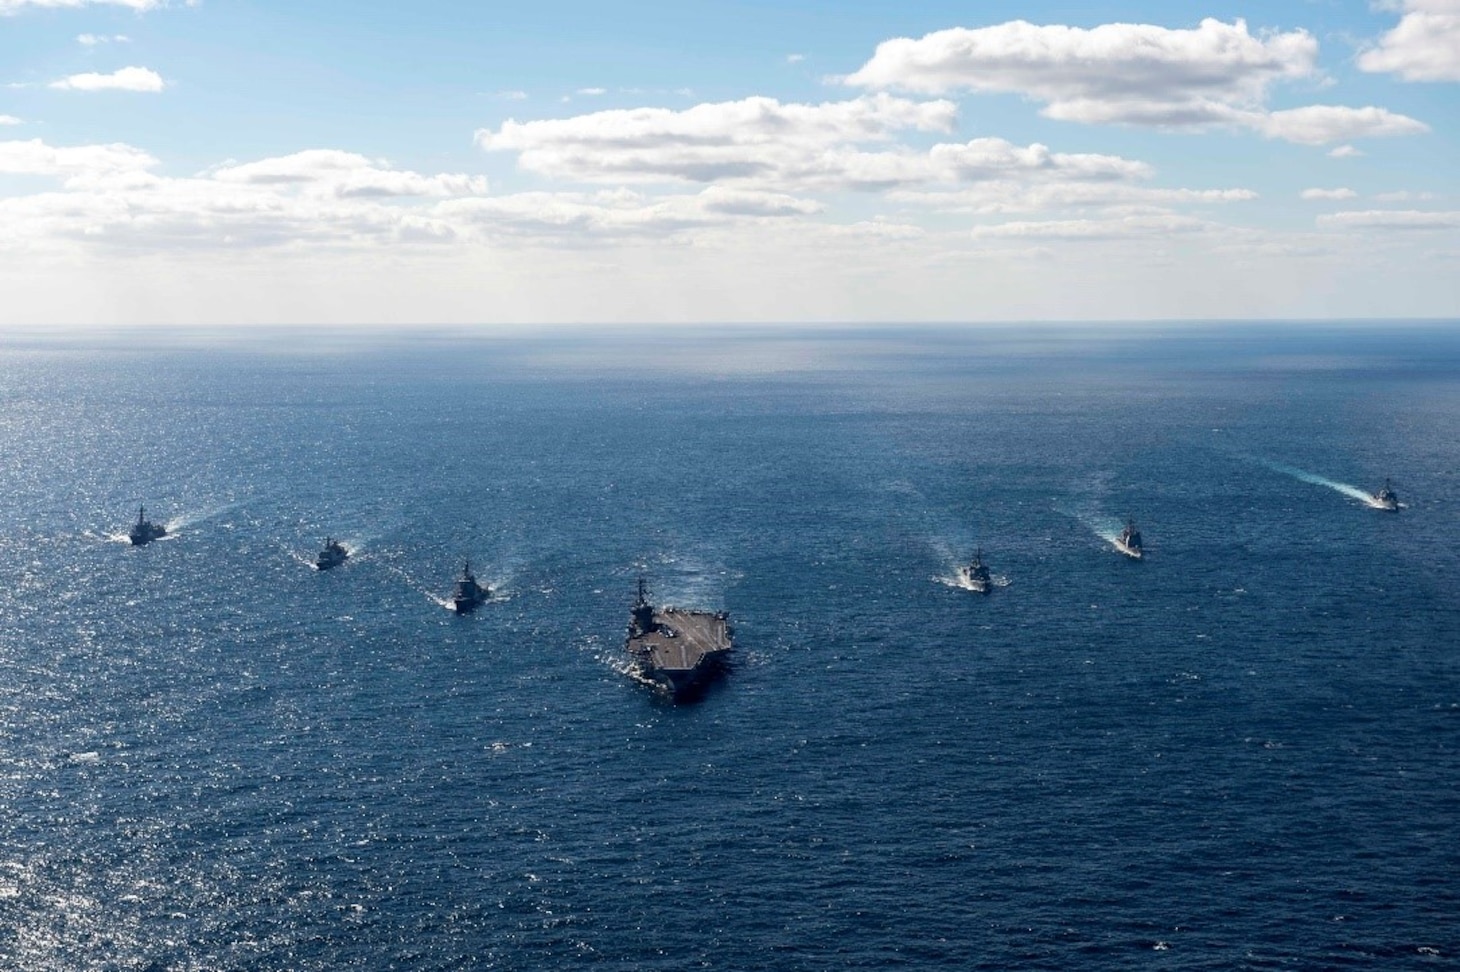 The Nimitz-class aircraft carrier USS Carl Vinson (CVN 70), the Sejong the Great-class guided-missile destroyer ROKS Sejong the Great (DDG-991) from the Republic of Korea Navy, the Kongo-class guided-missile destroyer JS Kongo (DDG-173) from the Japan Maritime Self-Defense Force, sail together during a trilateral exercise, Jan. 16. The exercise allowed maritime forces from Japan, Republic of Korea, and U.S. to train together to enhance coordination on maritime domain awareness and other shared security interests. Vinson, flagship of Carrier Strike Group ONE, is deployed to the U.S. 7th Fleet area of operations in support of a free and open Indo-Pacific. (U.S. Navy photo by Mass Communication Specialist 2nd Class Isaiah B. Goessl)